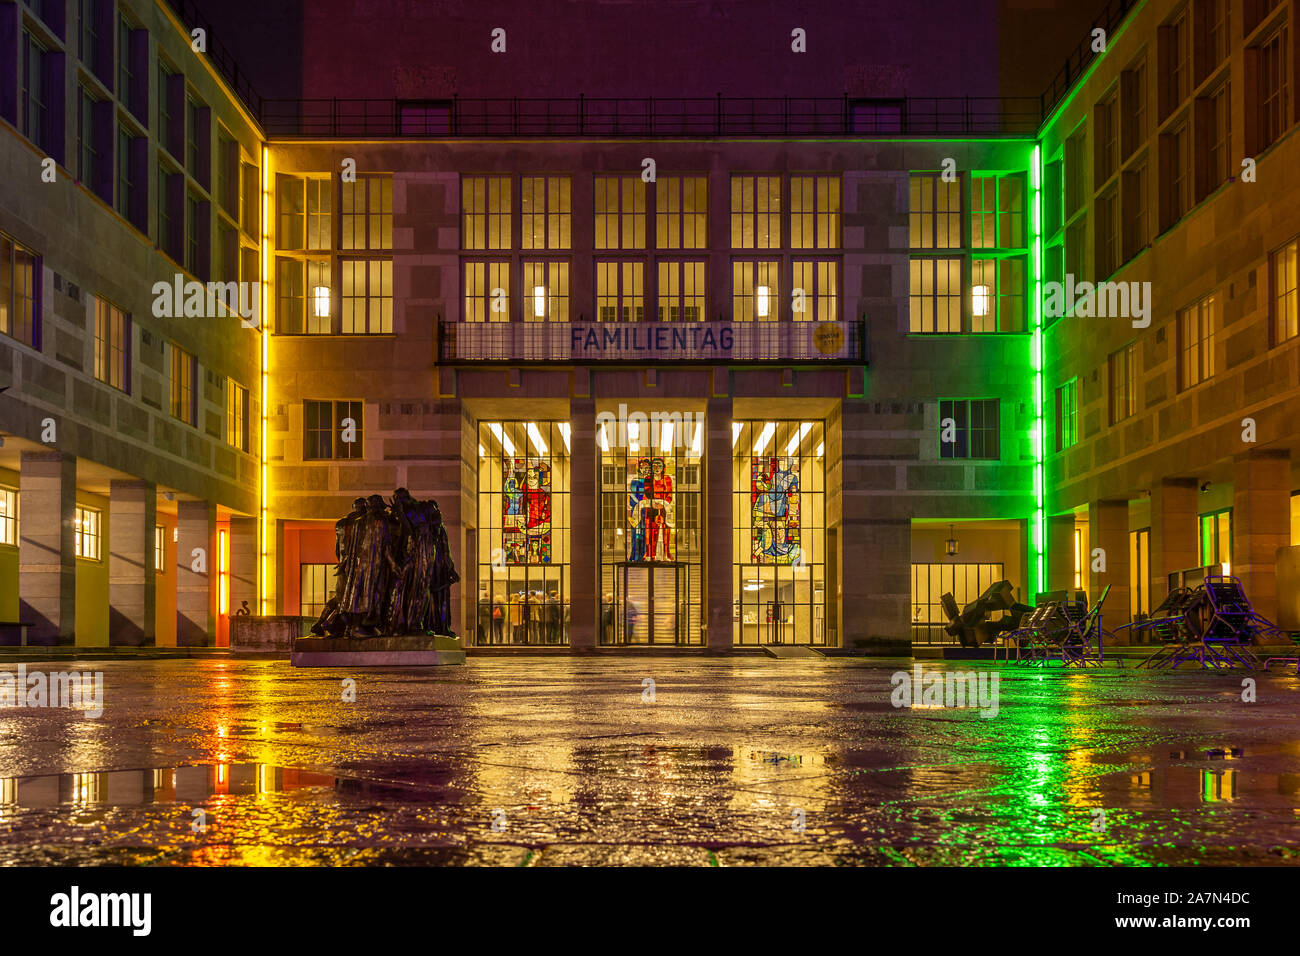 Basel Art Museum, Hauptbau building courtyard, facade and entrance, at night. Conservative modernism architecture style. Stock Photo